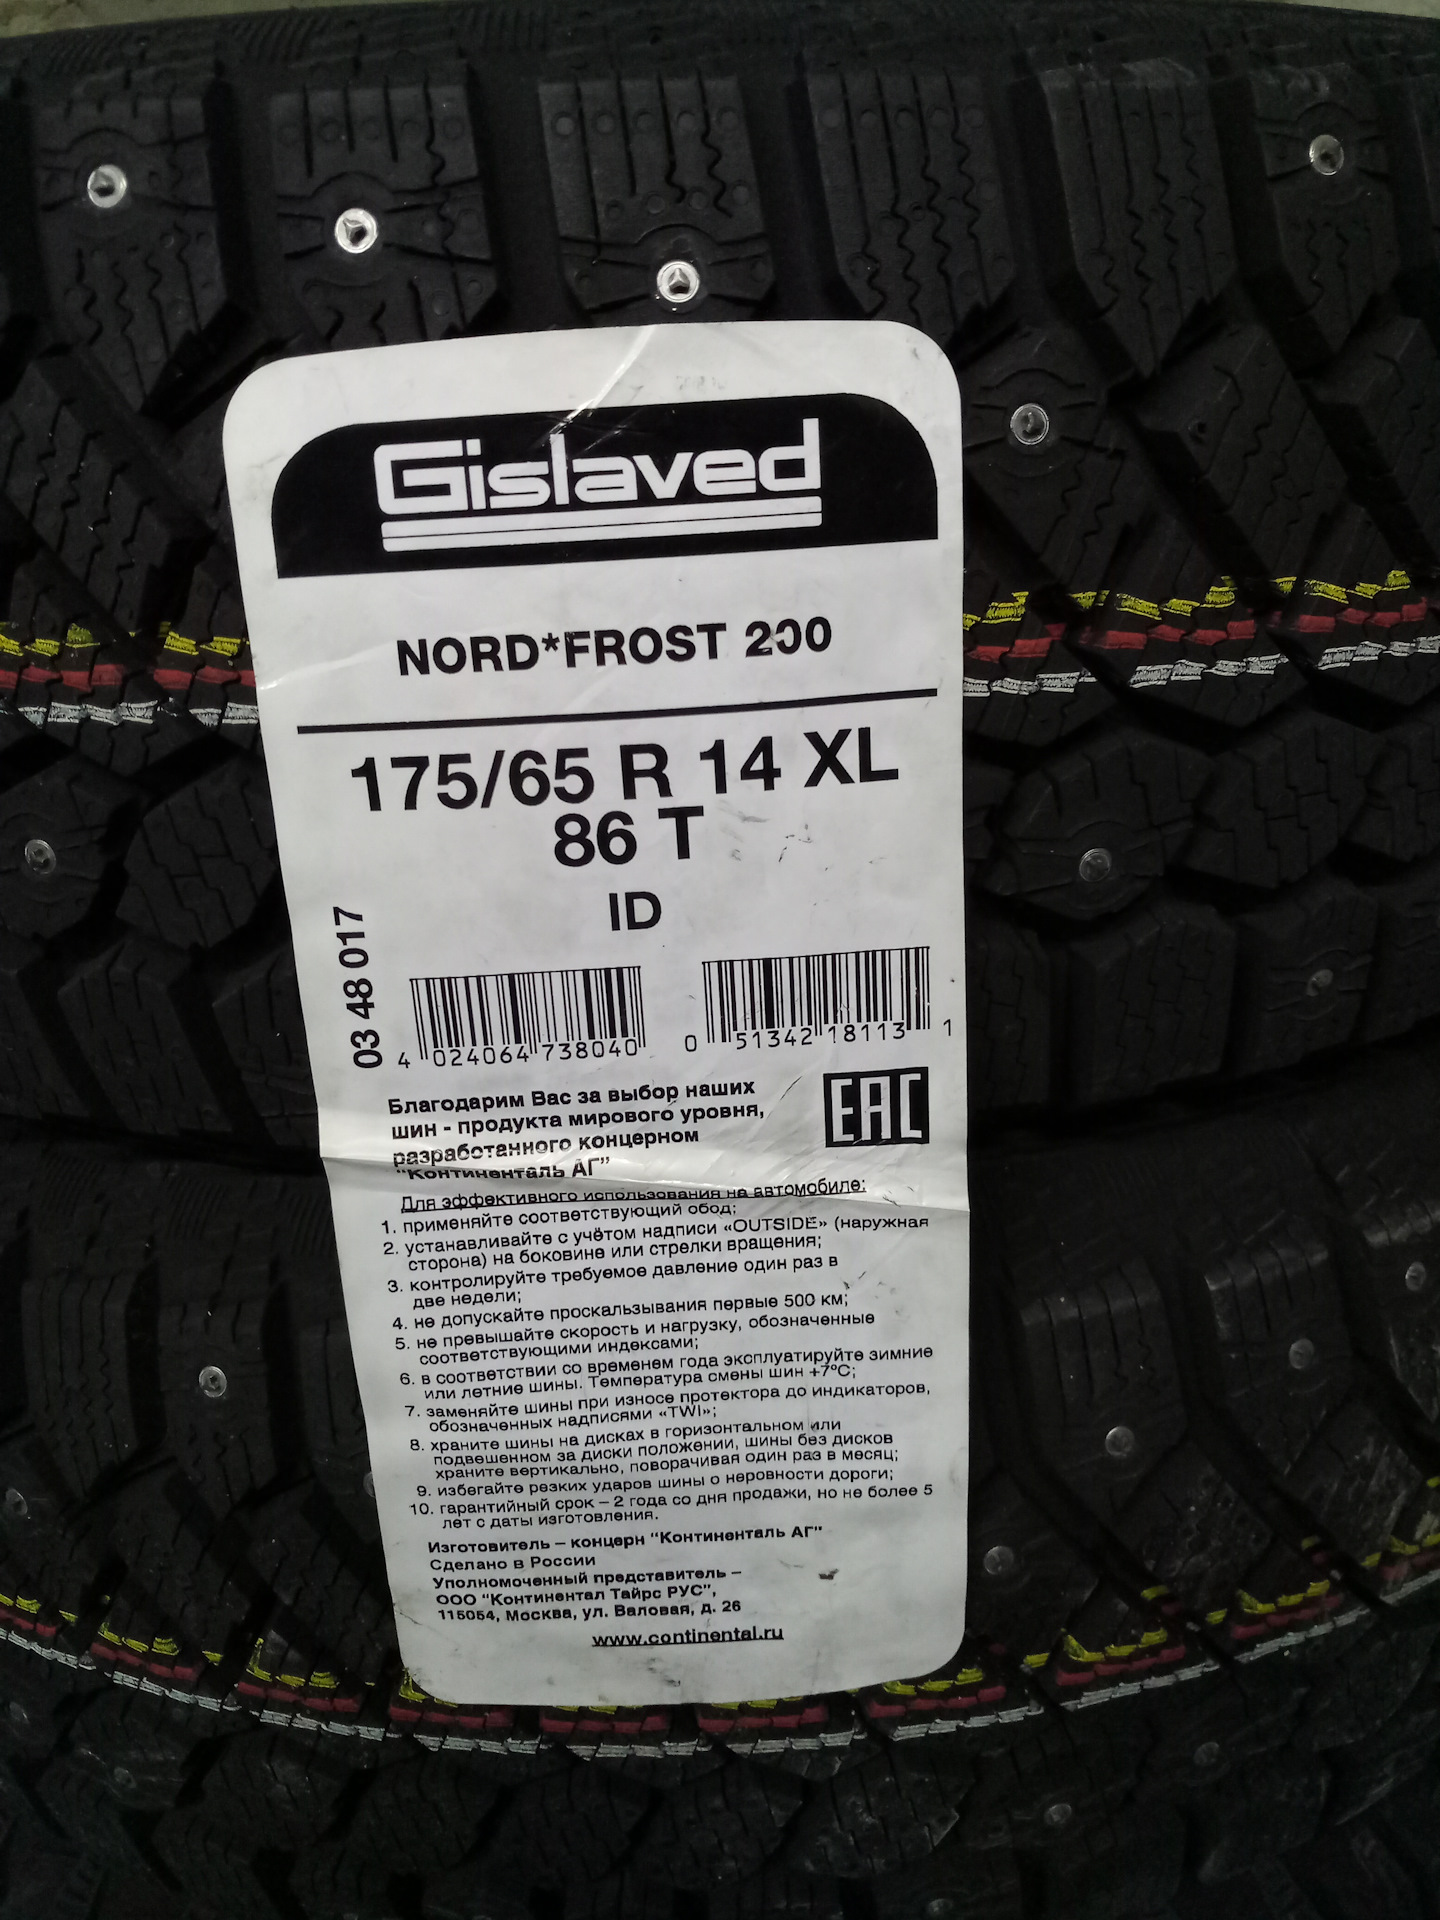 Gislaved frost 200 купить. Шины Гиславед Норд Фрост 200. 175/65 R14 86t XL Nord Frost 200 Gislaved. Гиславед 175/65/14 t 86 Nord Frost 200 ID XL. Gislaved Nord Frost 200 175/65 r14.